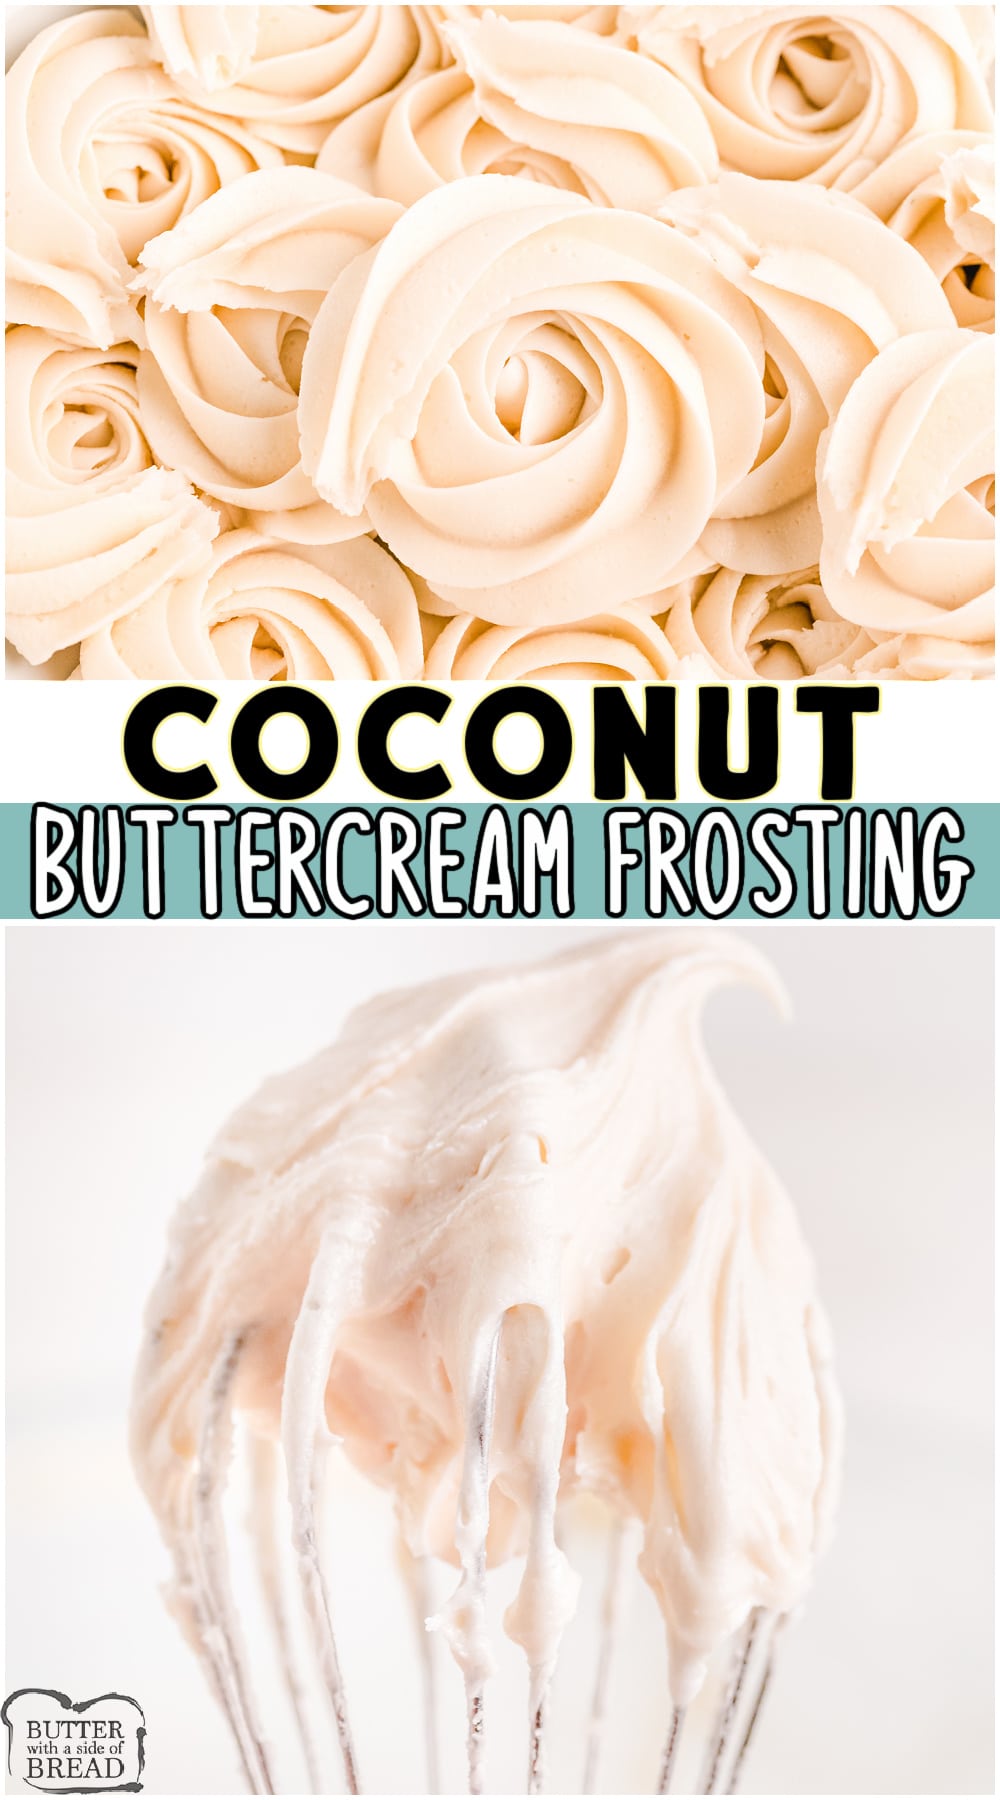 Coconut buttercream frosting recipe made with classic ingredients, with the addition of coconut cream & coconut emulsion! Lovely coconut flavor in a perfectly light & creamy buttercream frosting recipe perfect for just about any baked goods. #coconut #buttercream #frosting #homemade #dessert #easyrecipe from BUTTER WITH A SIDE OF BREAD